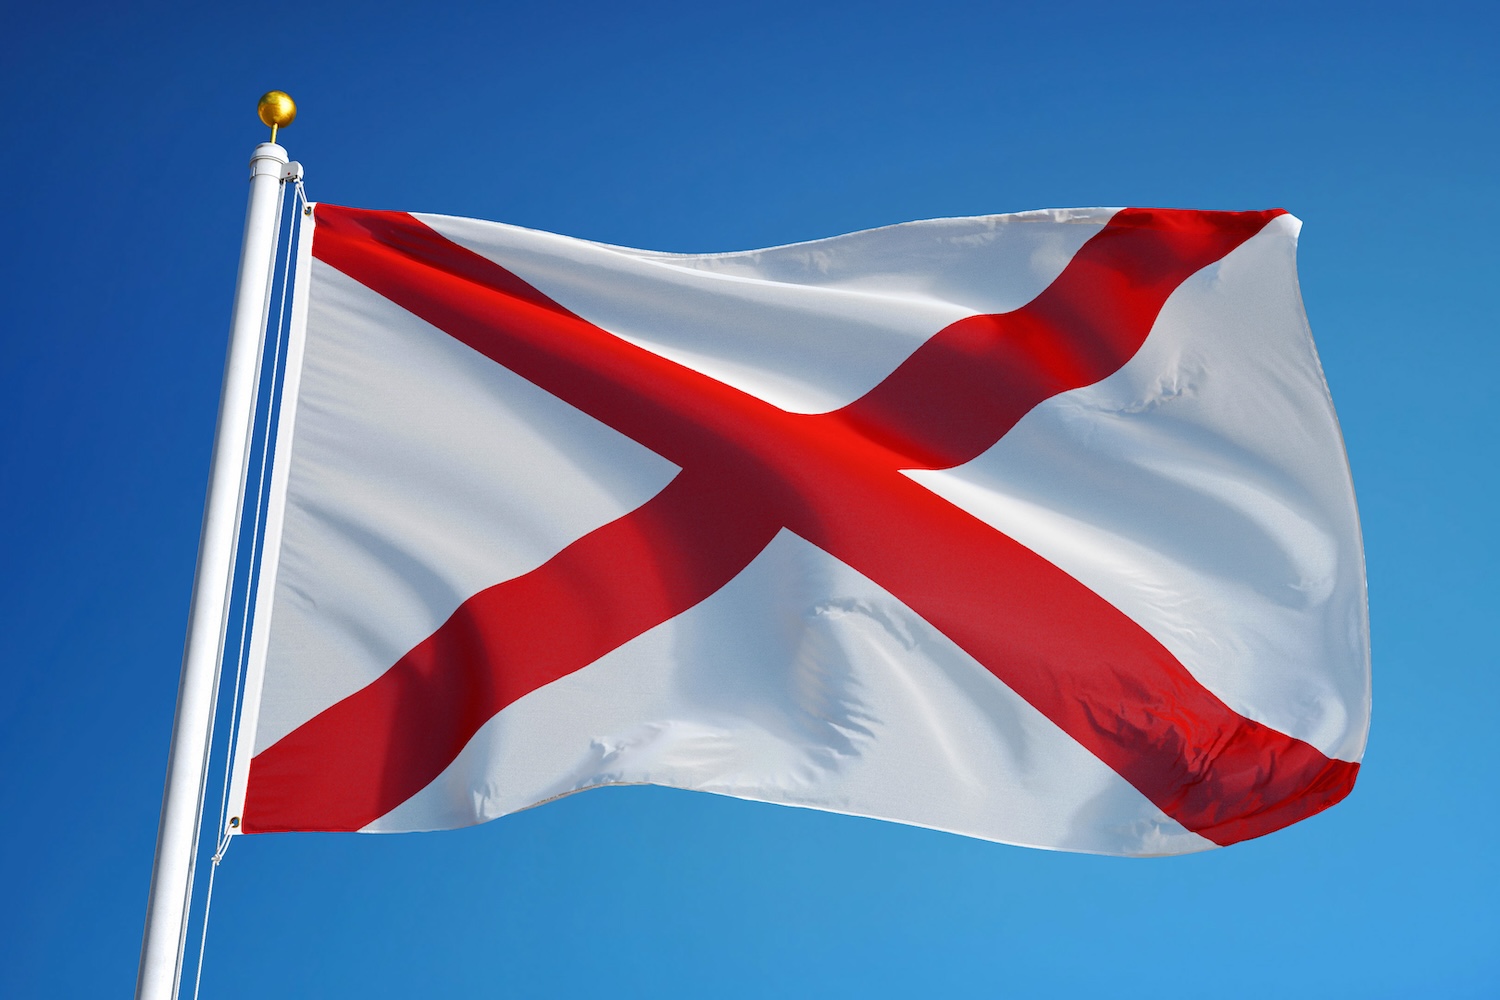 Alabama state flag featuring a red X on a white field, shown against a bright blue sky